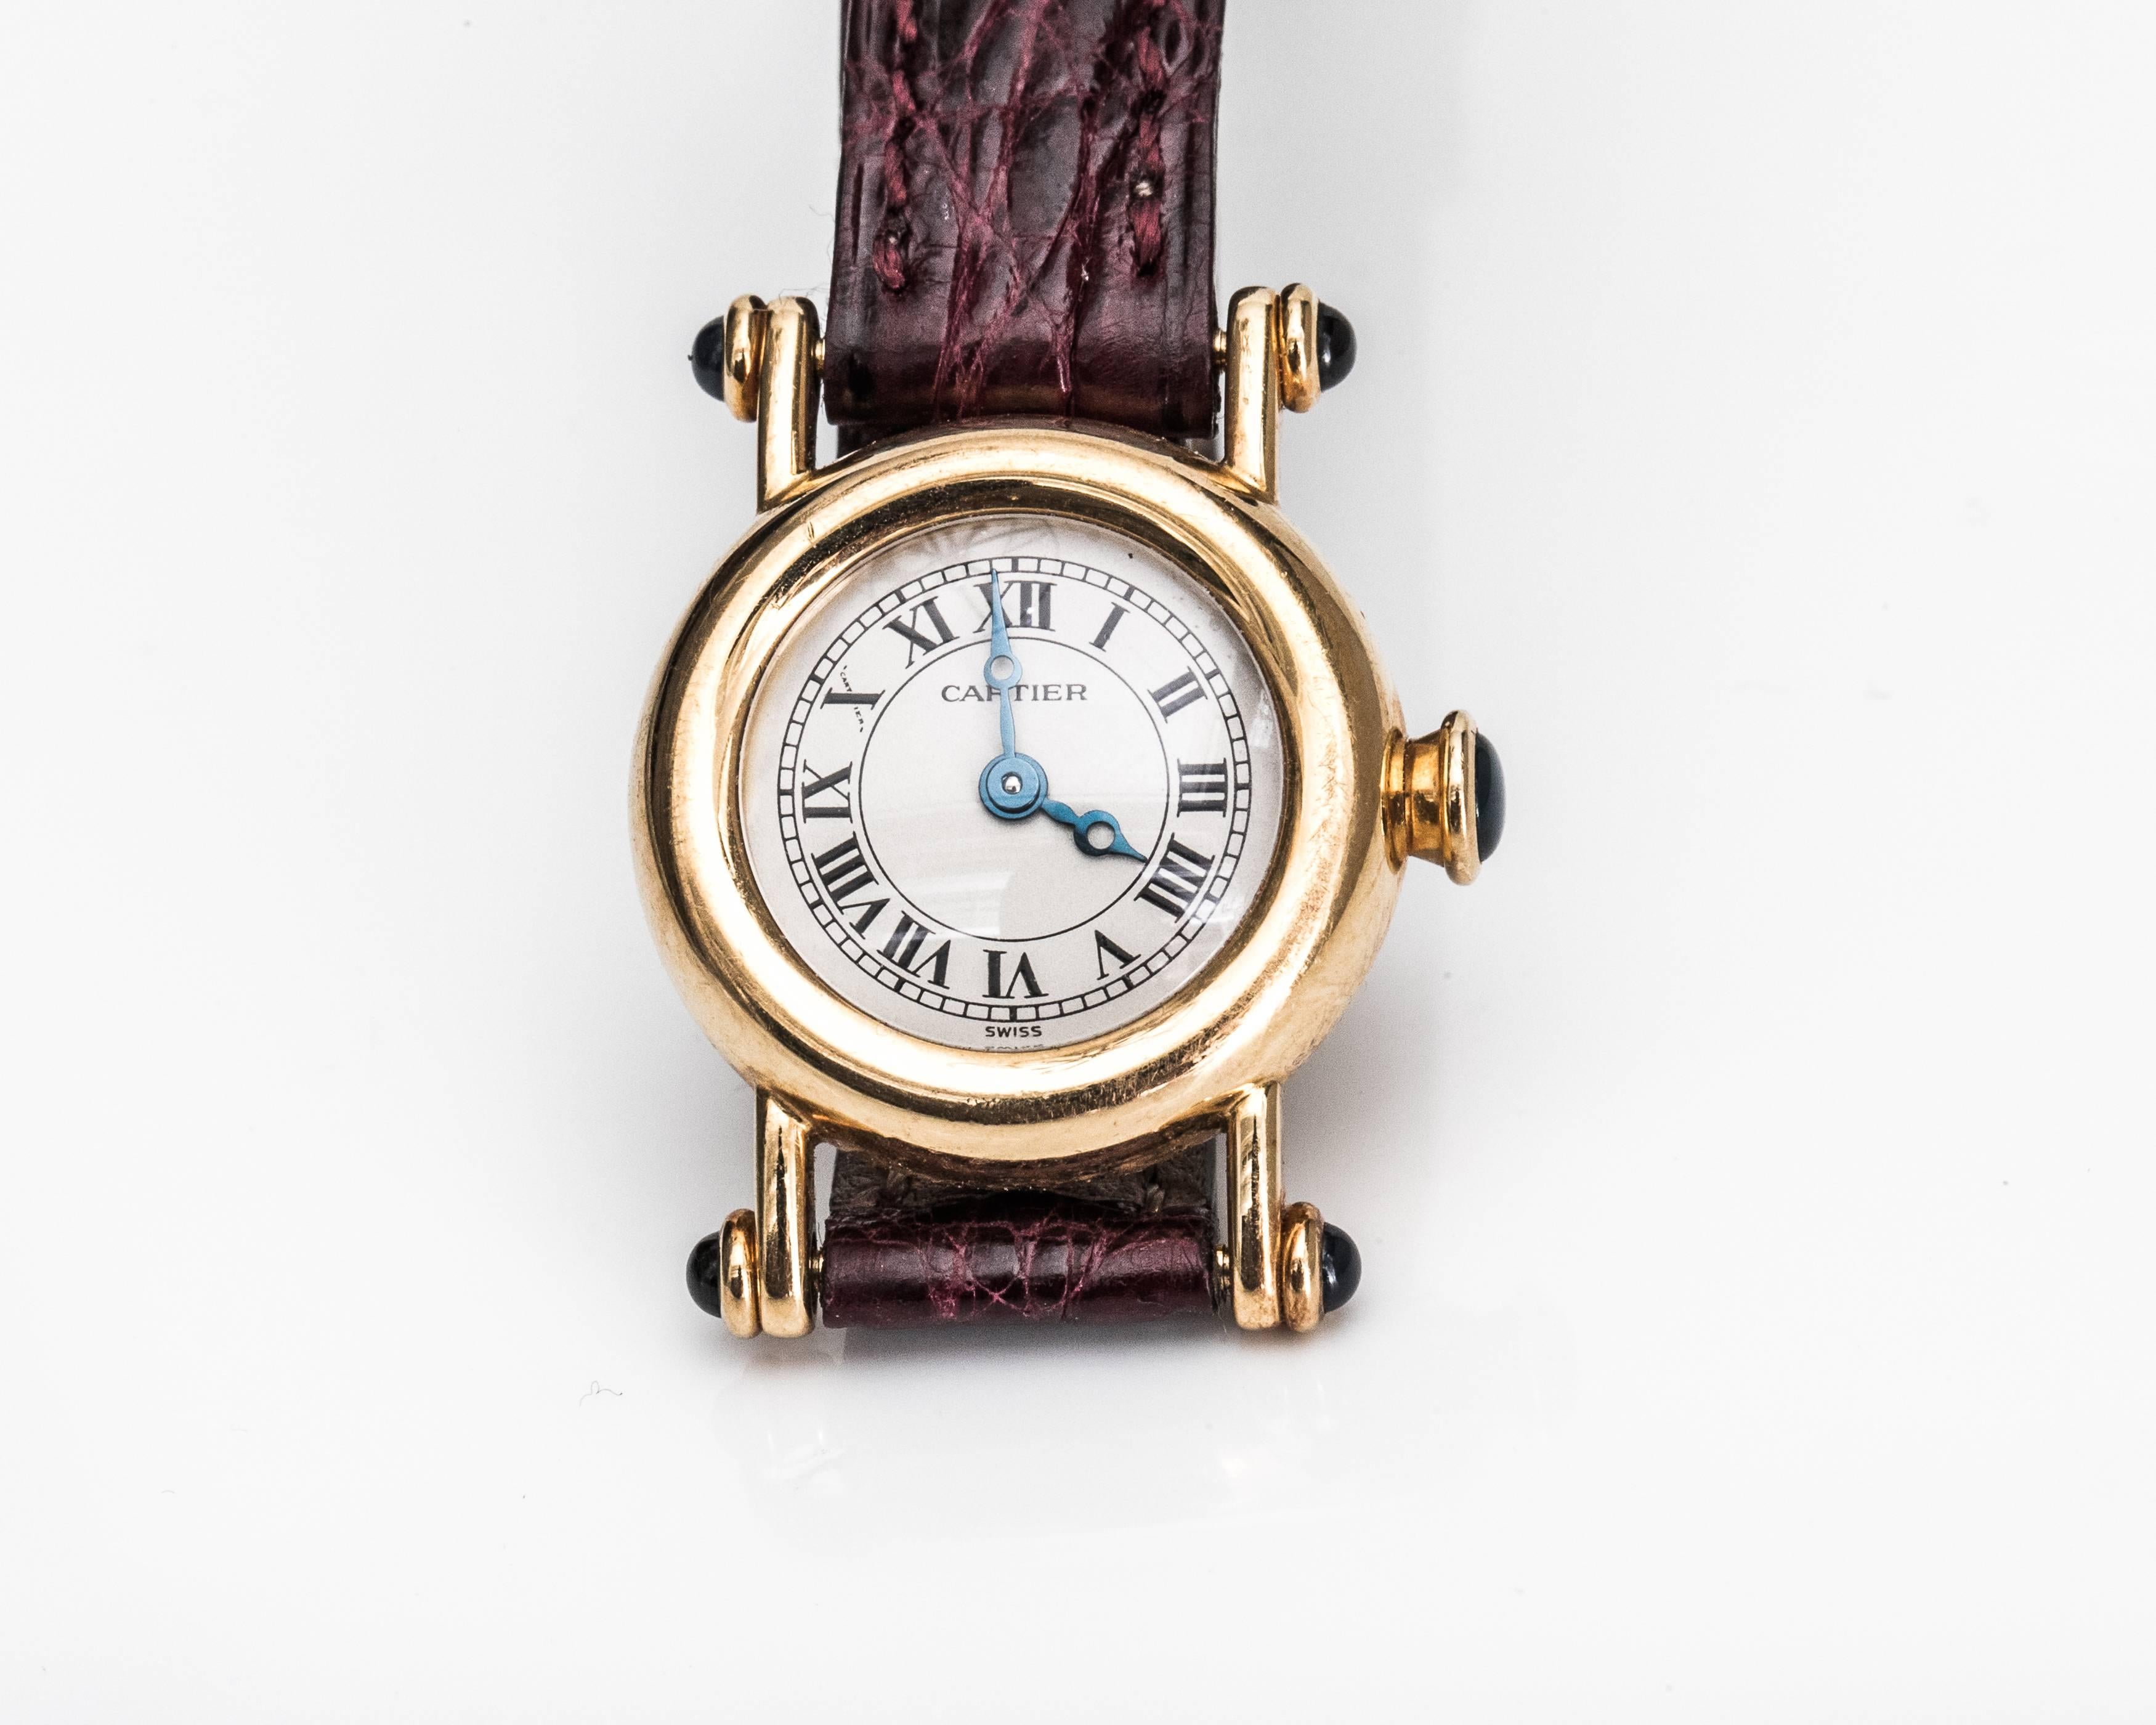 This gorgeous 1980s Swiss Made watch is a Cartier French classic. It features an 18 Karat Yellow Gold Case and clasp, 5 Sapphire Cabochons, white dial with black Roman Numeral Hour Markers, black Cathedral Hands and Quartz movement. The exquisite 18